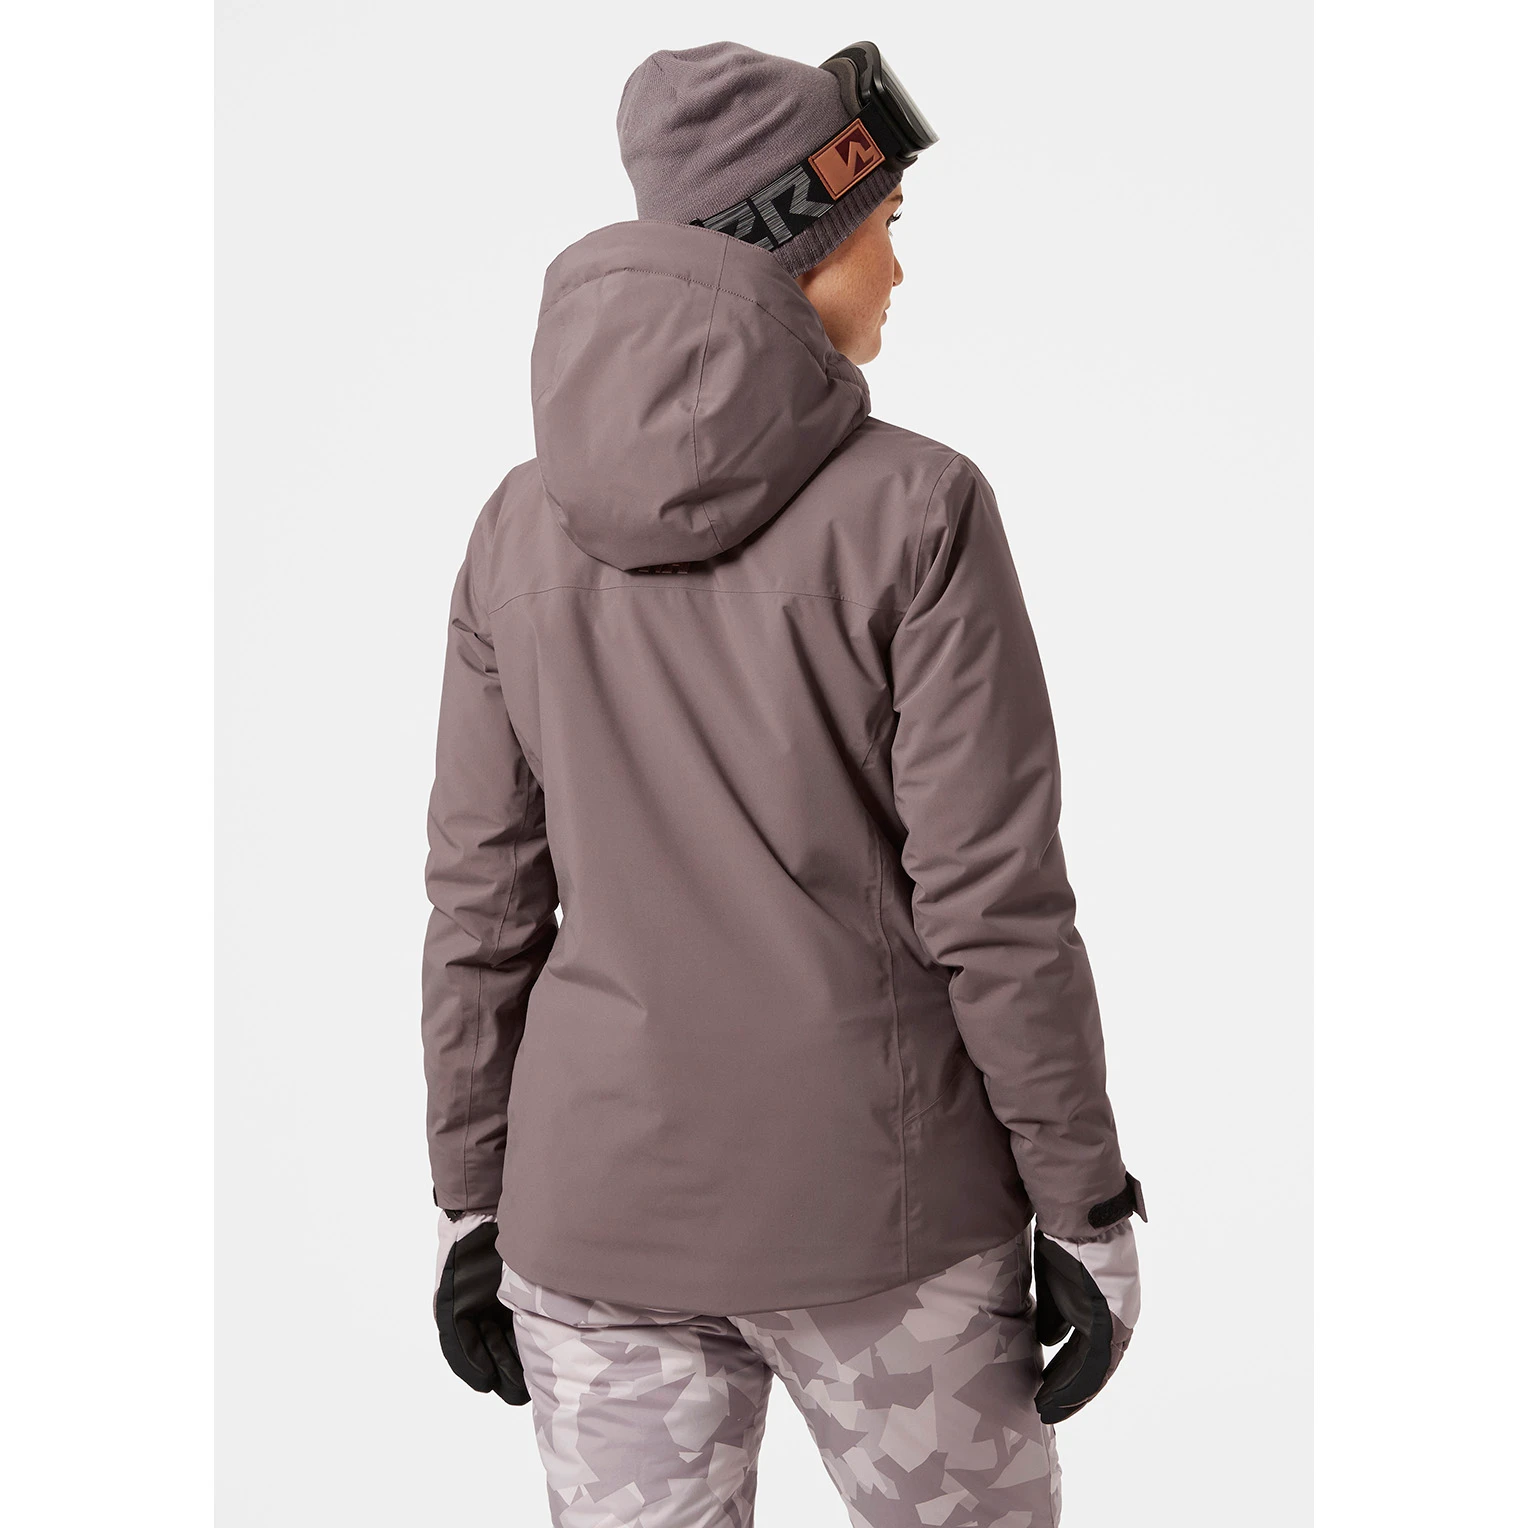 Image 2 of HELLY HANSEN - W SNOWSTAR JACKET, SPARROW GREY, XL Only - 2022